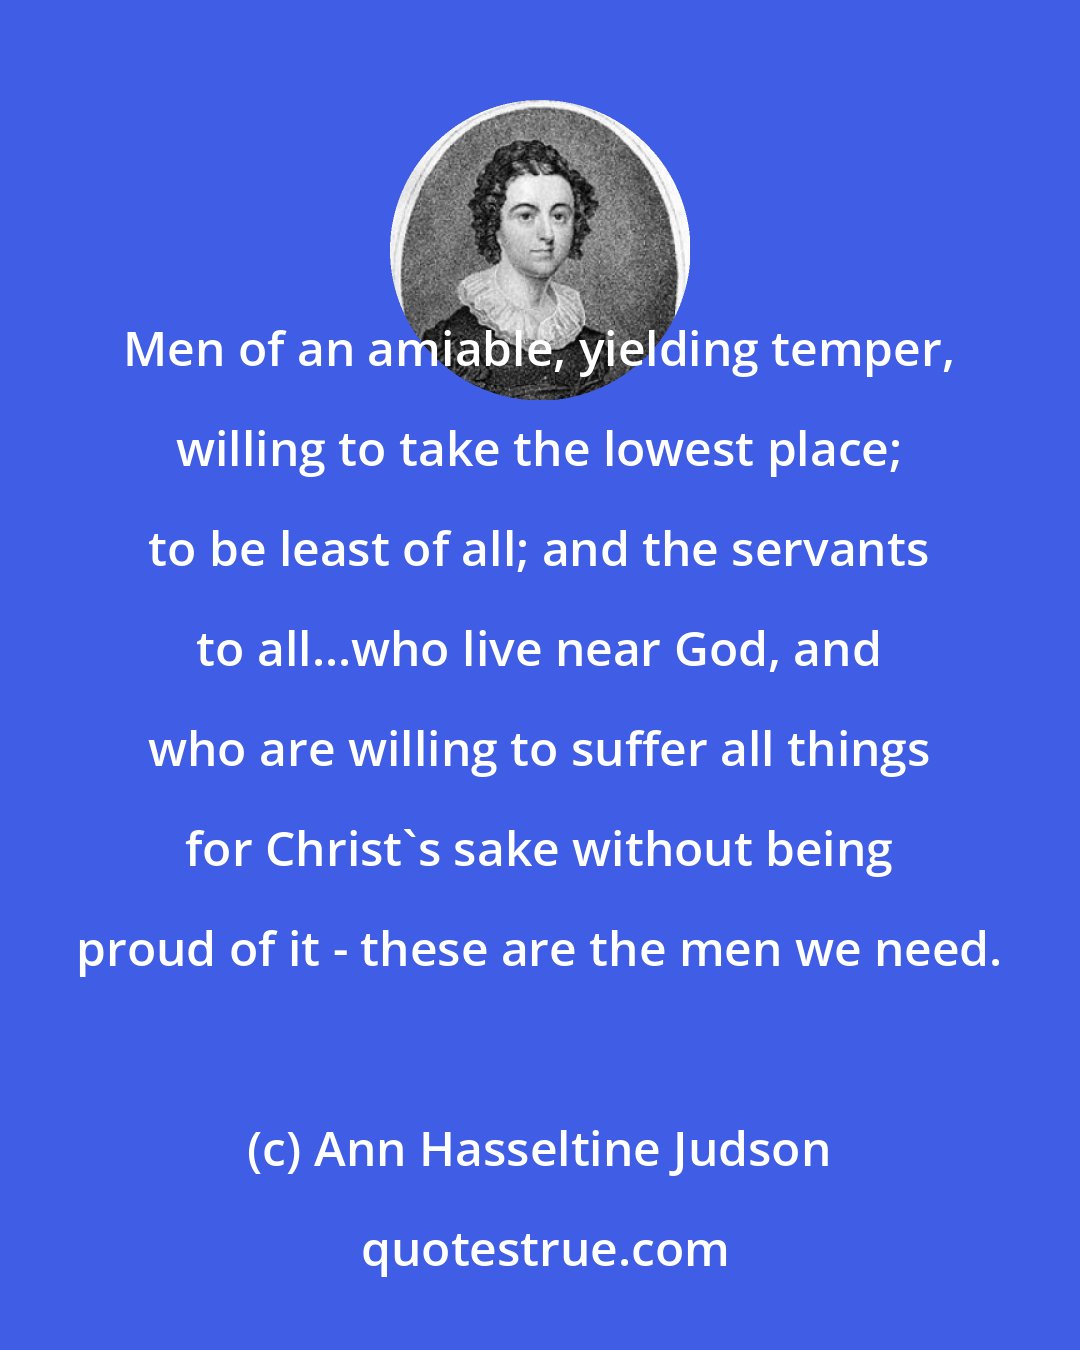 Ann Hasseltine Judson: Men of an amiable, yielding temper, willing to take the lowest place; to be least of all; and the servants to all...who live near God, and who are willing to suffer all things for Christ's sake without being proud of it - these are the men we need.